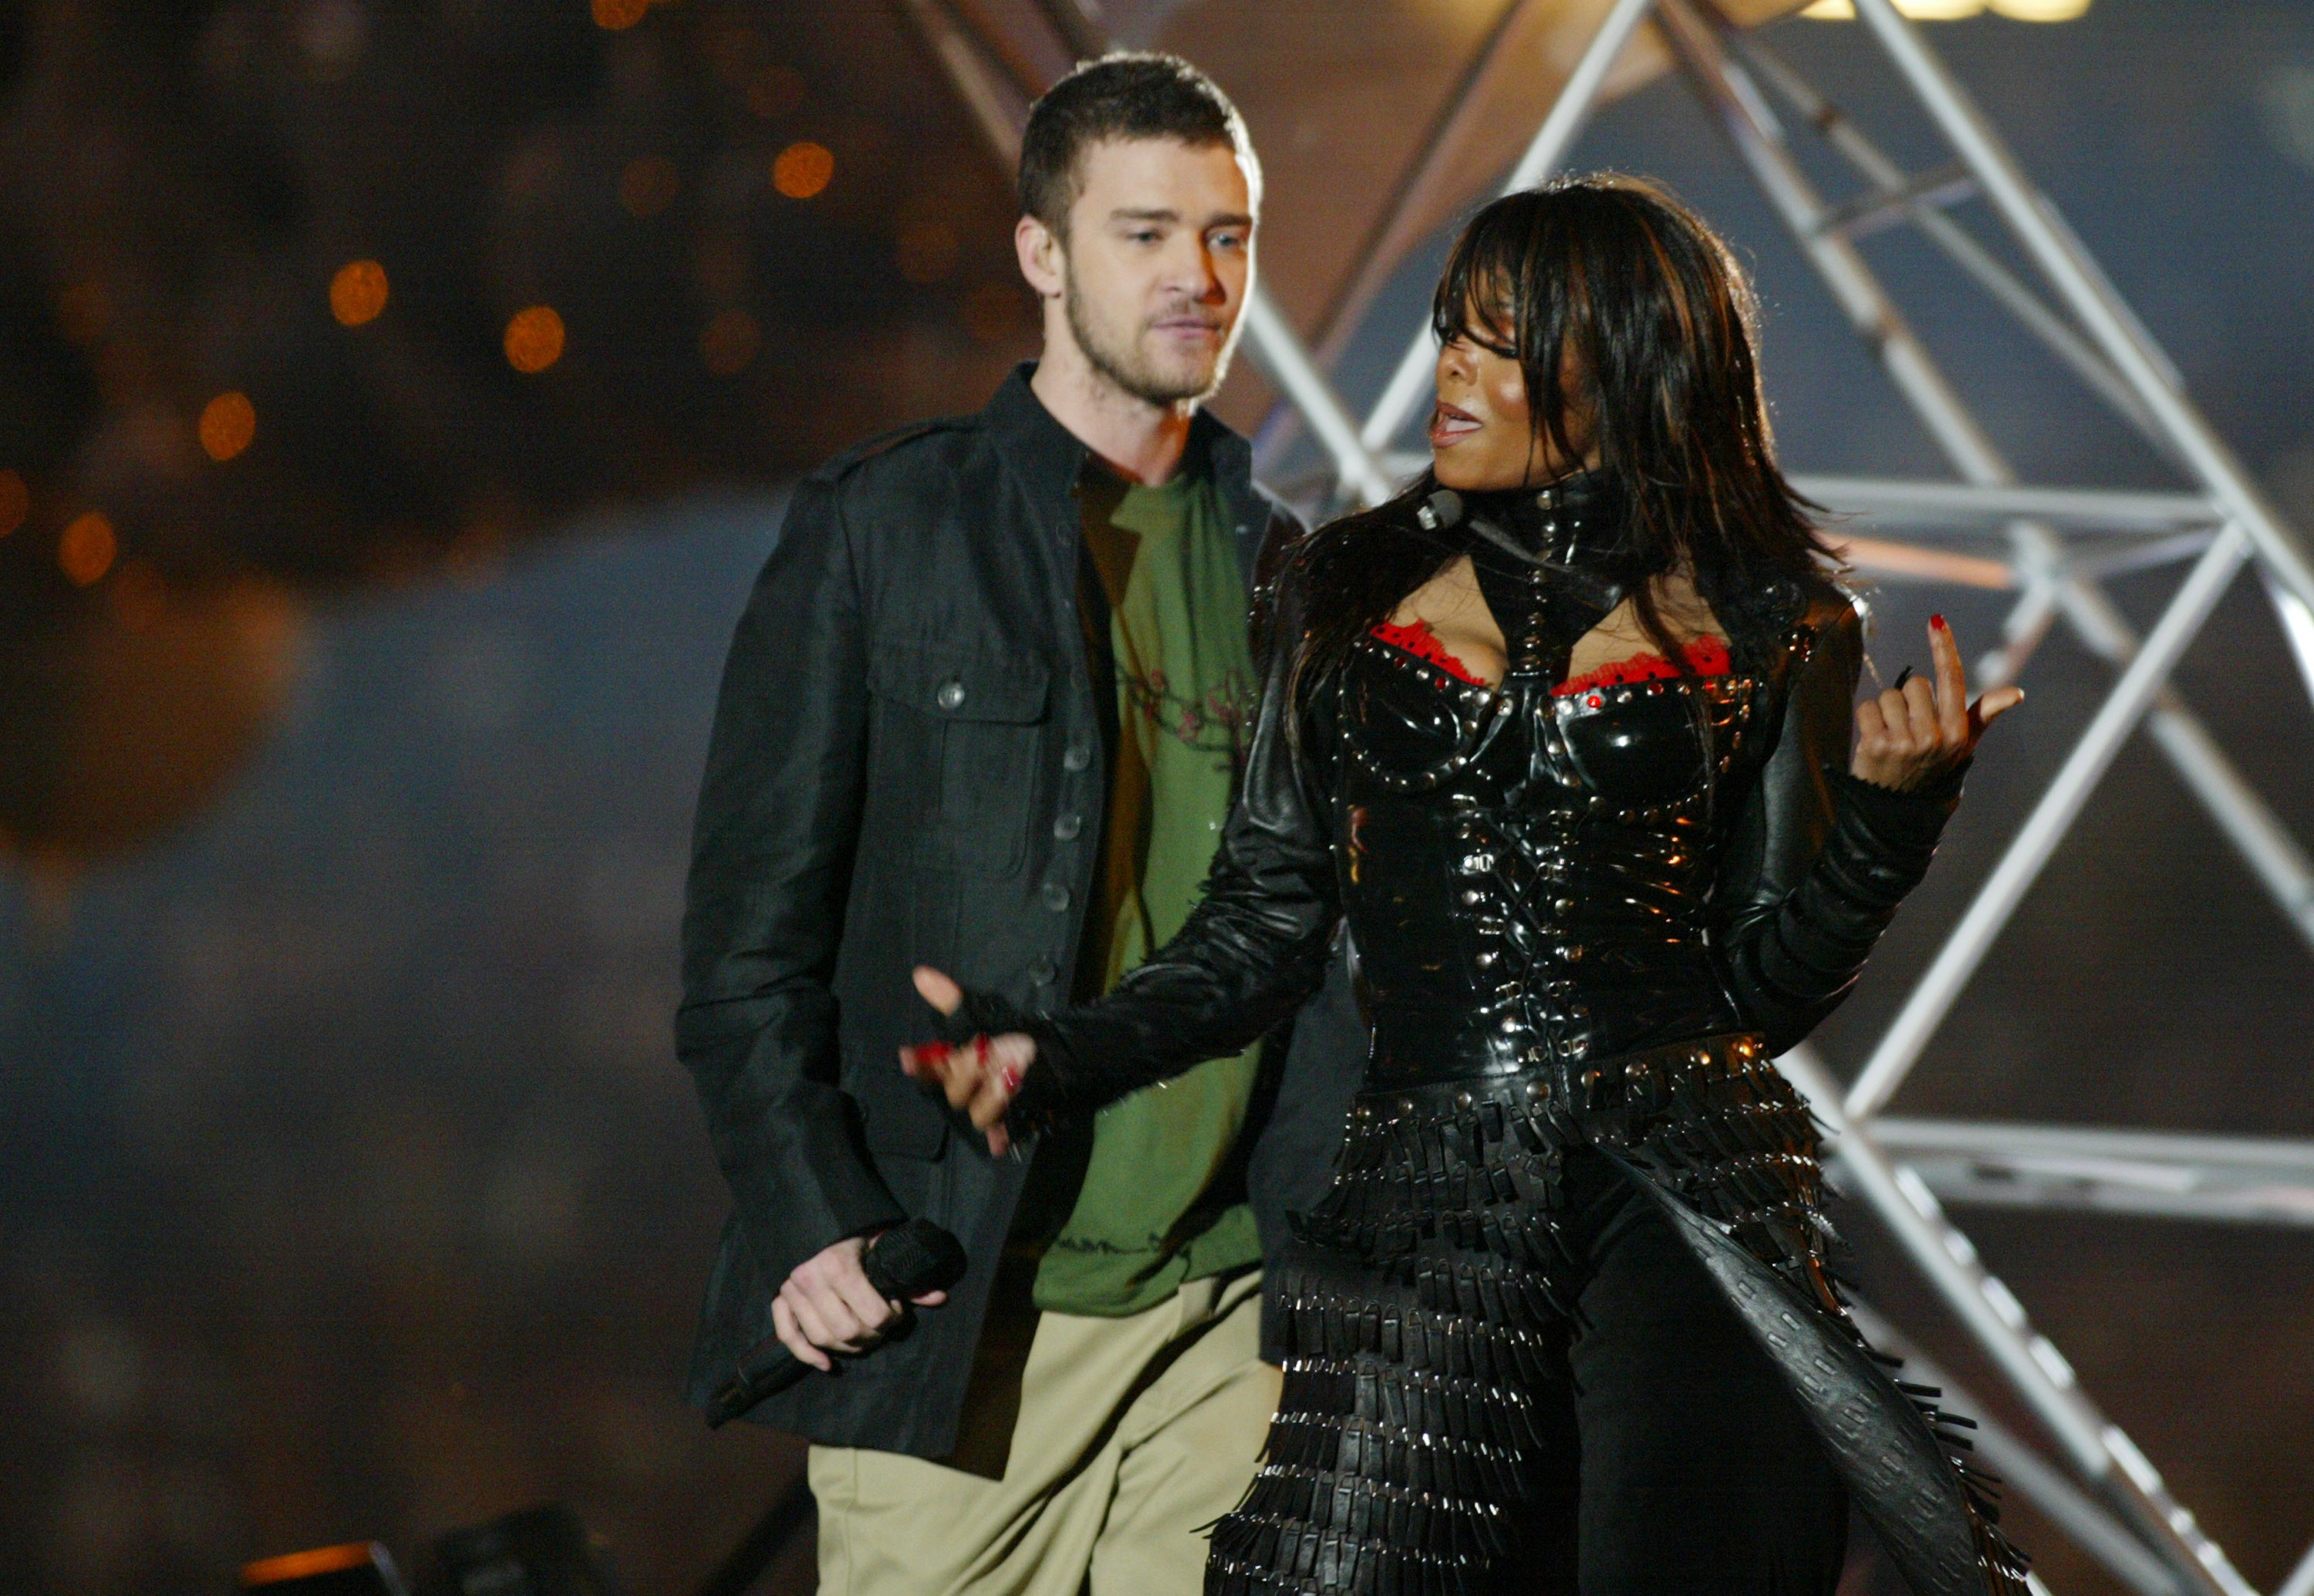 Justin Timberlake and Janet Jackson onstage during the 2004 Super Bowl halftime show